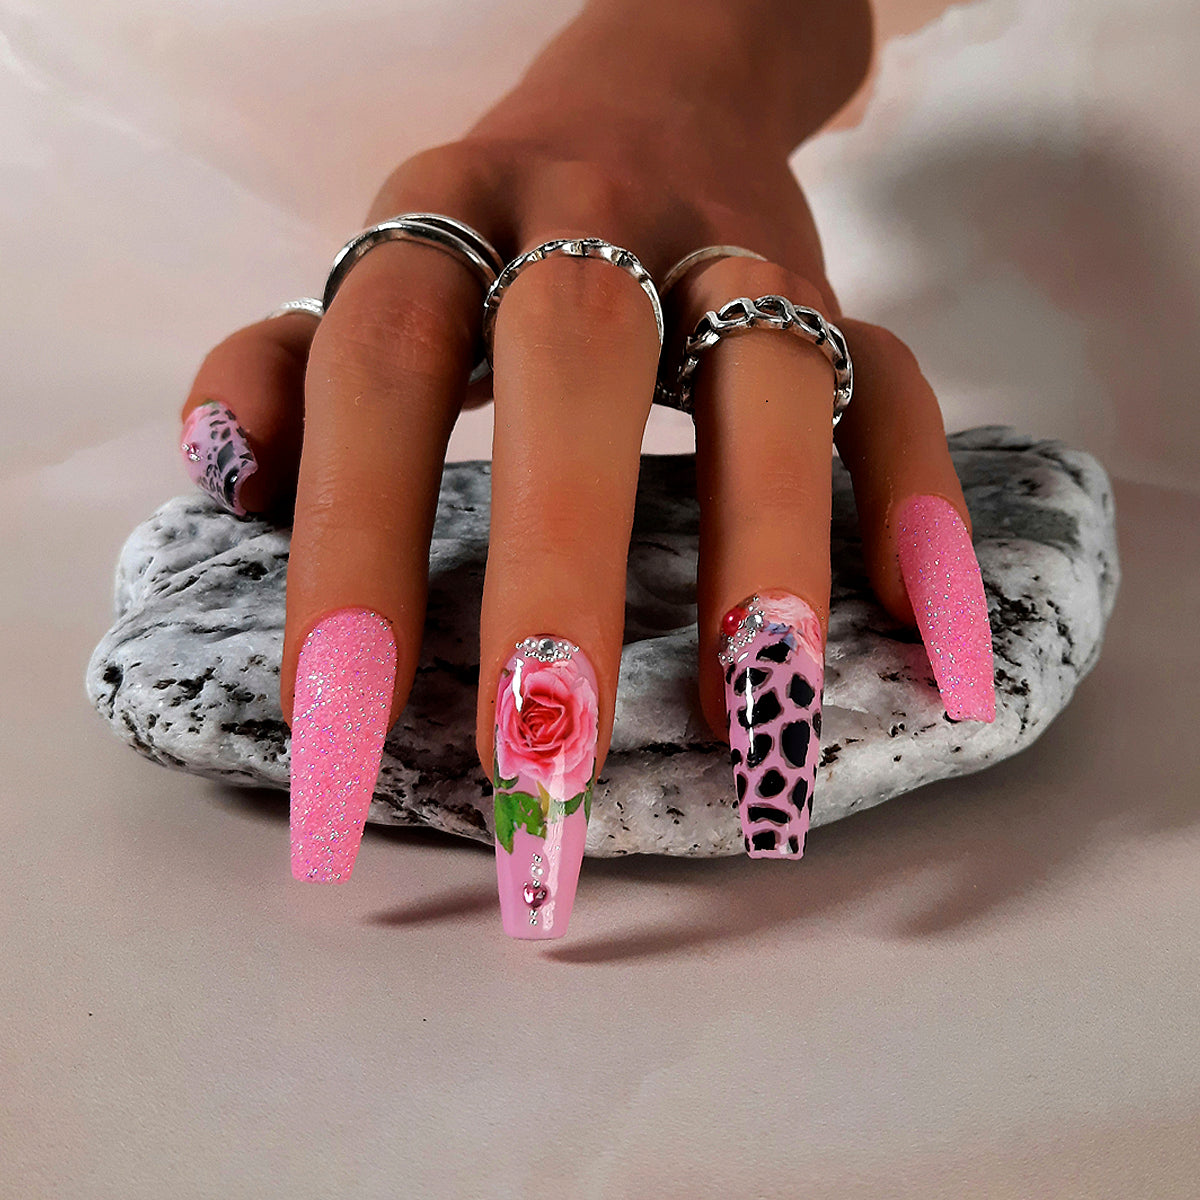 hand made pink press on nails with roses, animal print, glitter and crystals